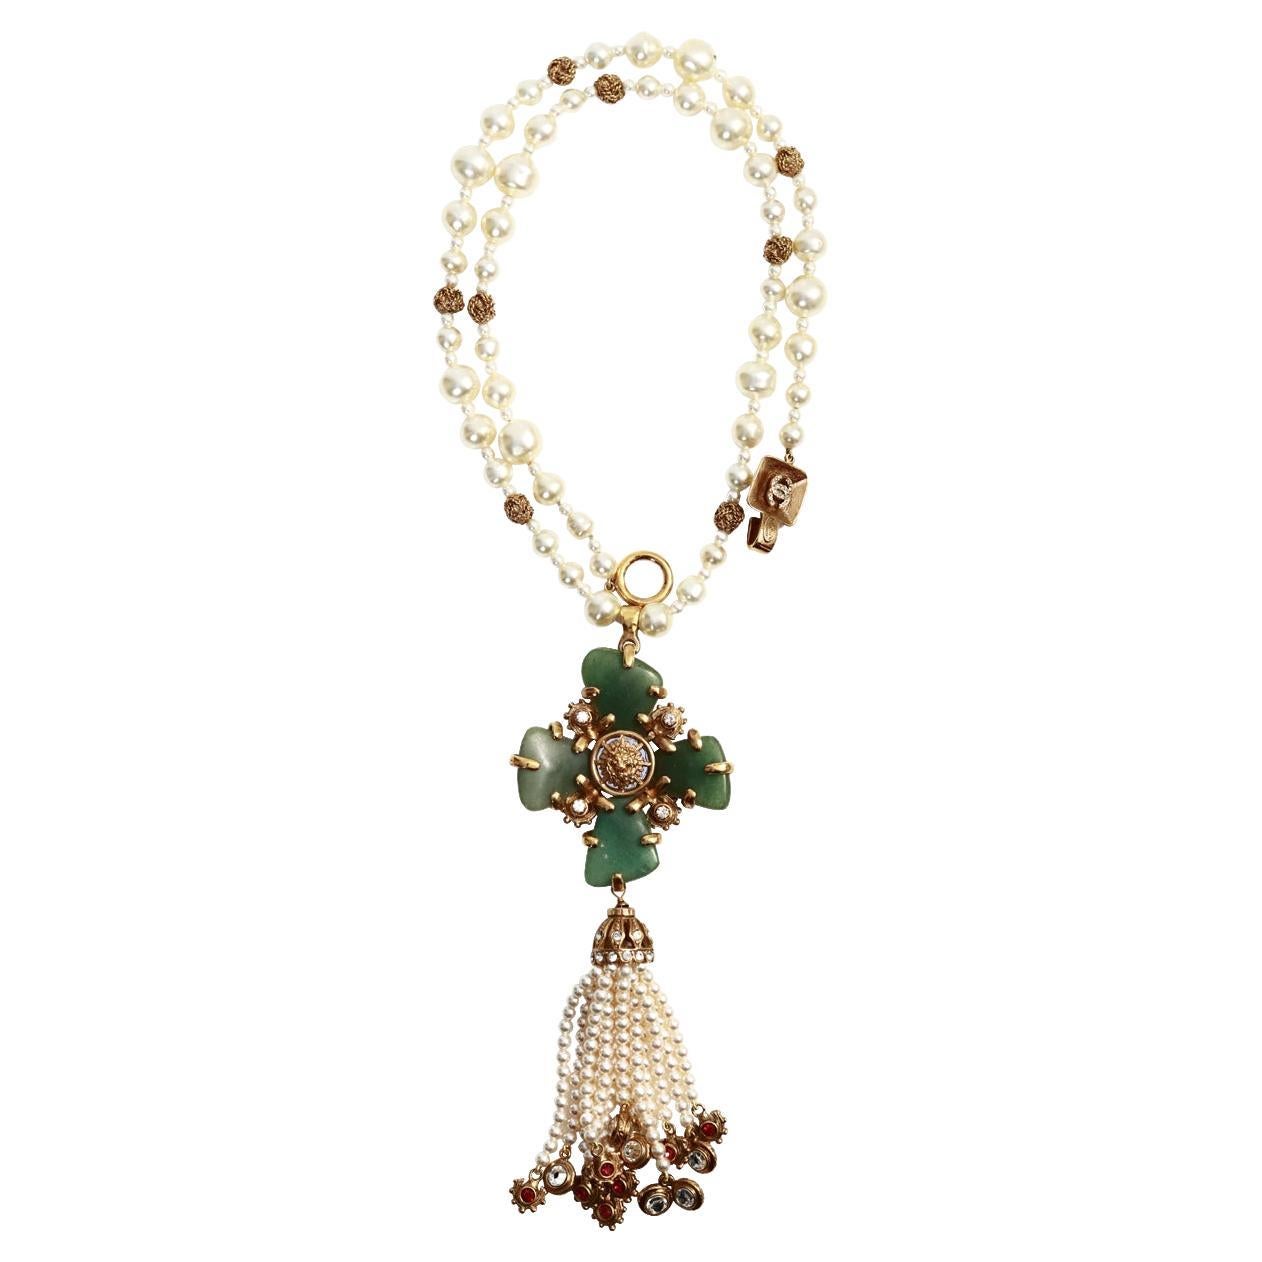 Vintage Chanel Faux Pearl Necklace With CC Rhinestones -  Hong Kong